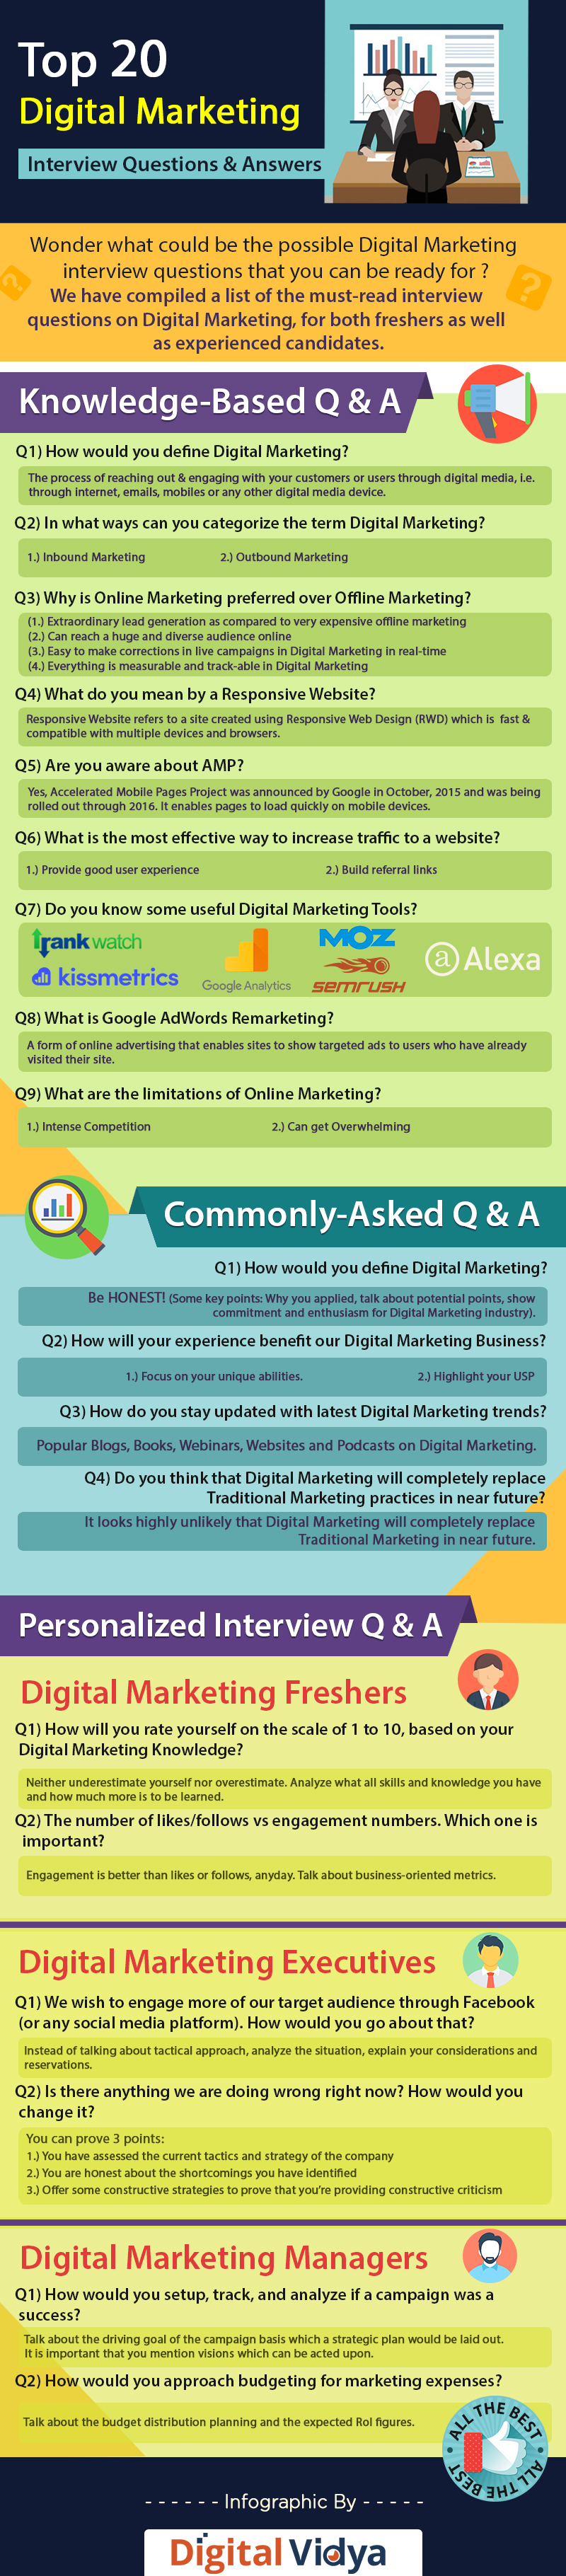 Top digital marketing interview questions and answers